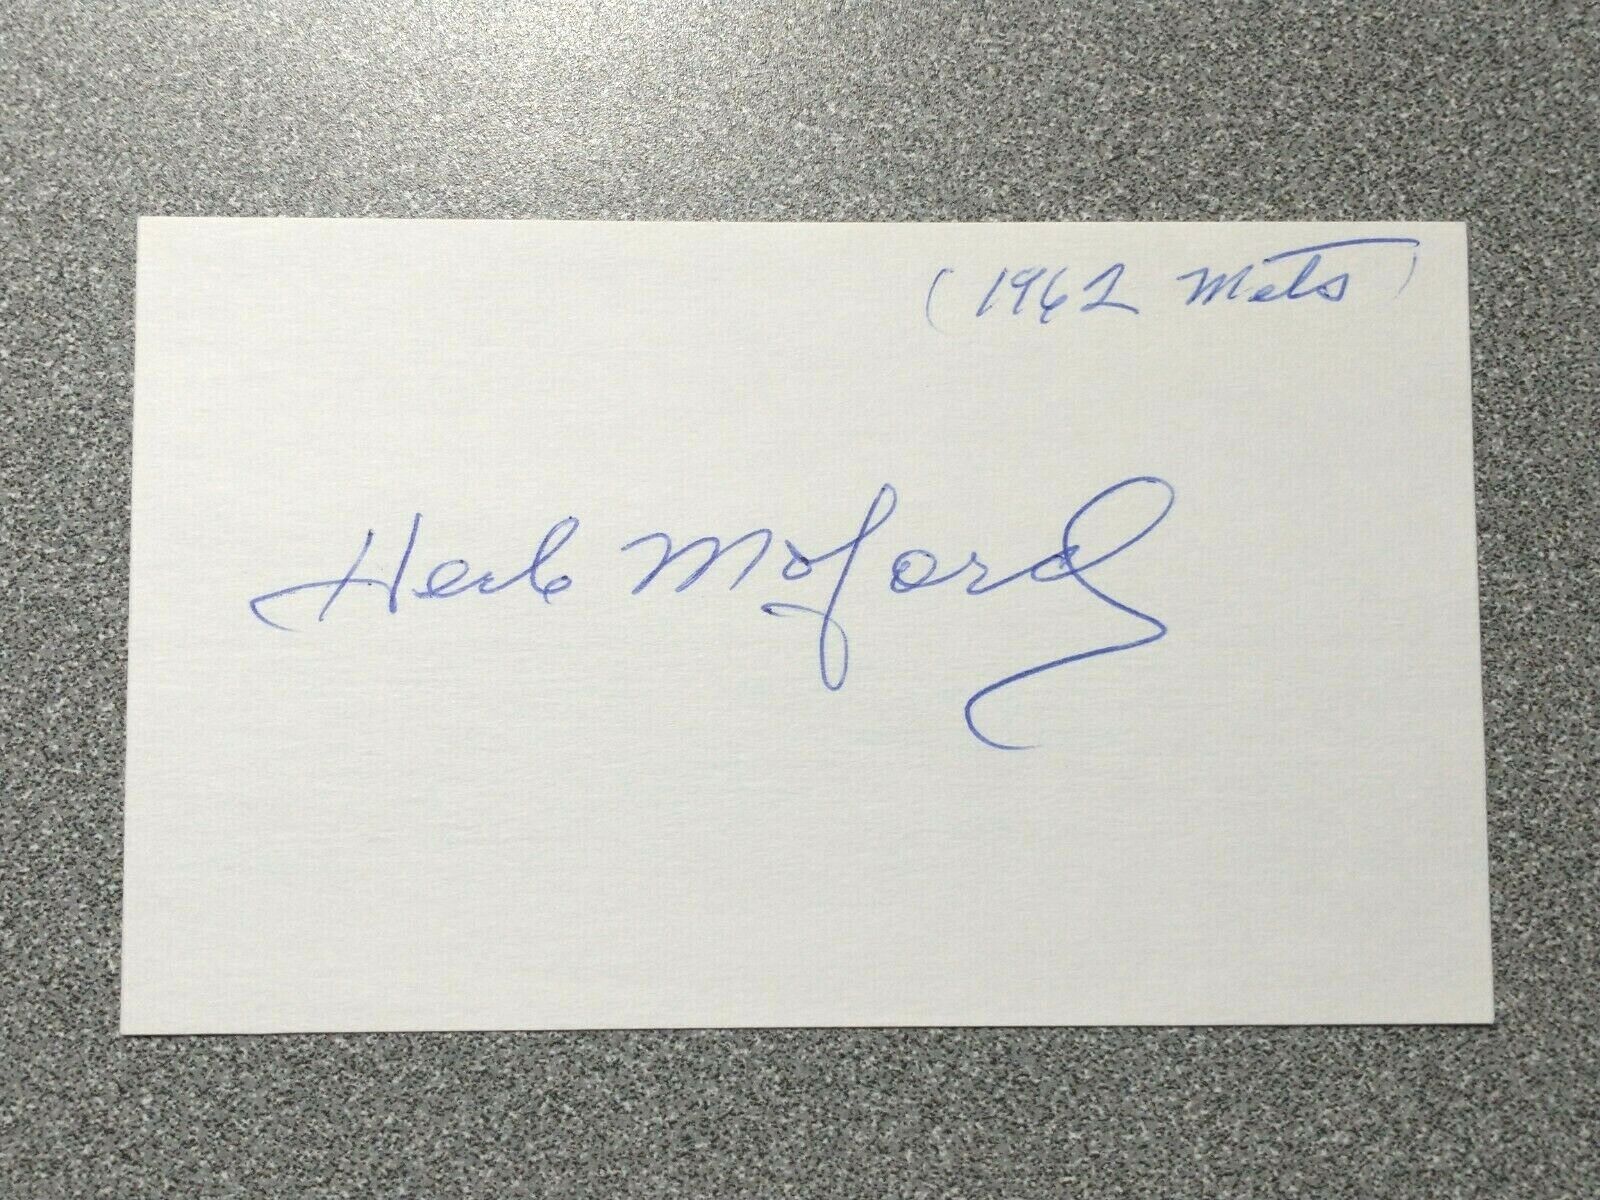 Herb Moford Mets Vintage Signed Autographed Index Card - Free Shipping